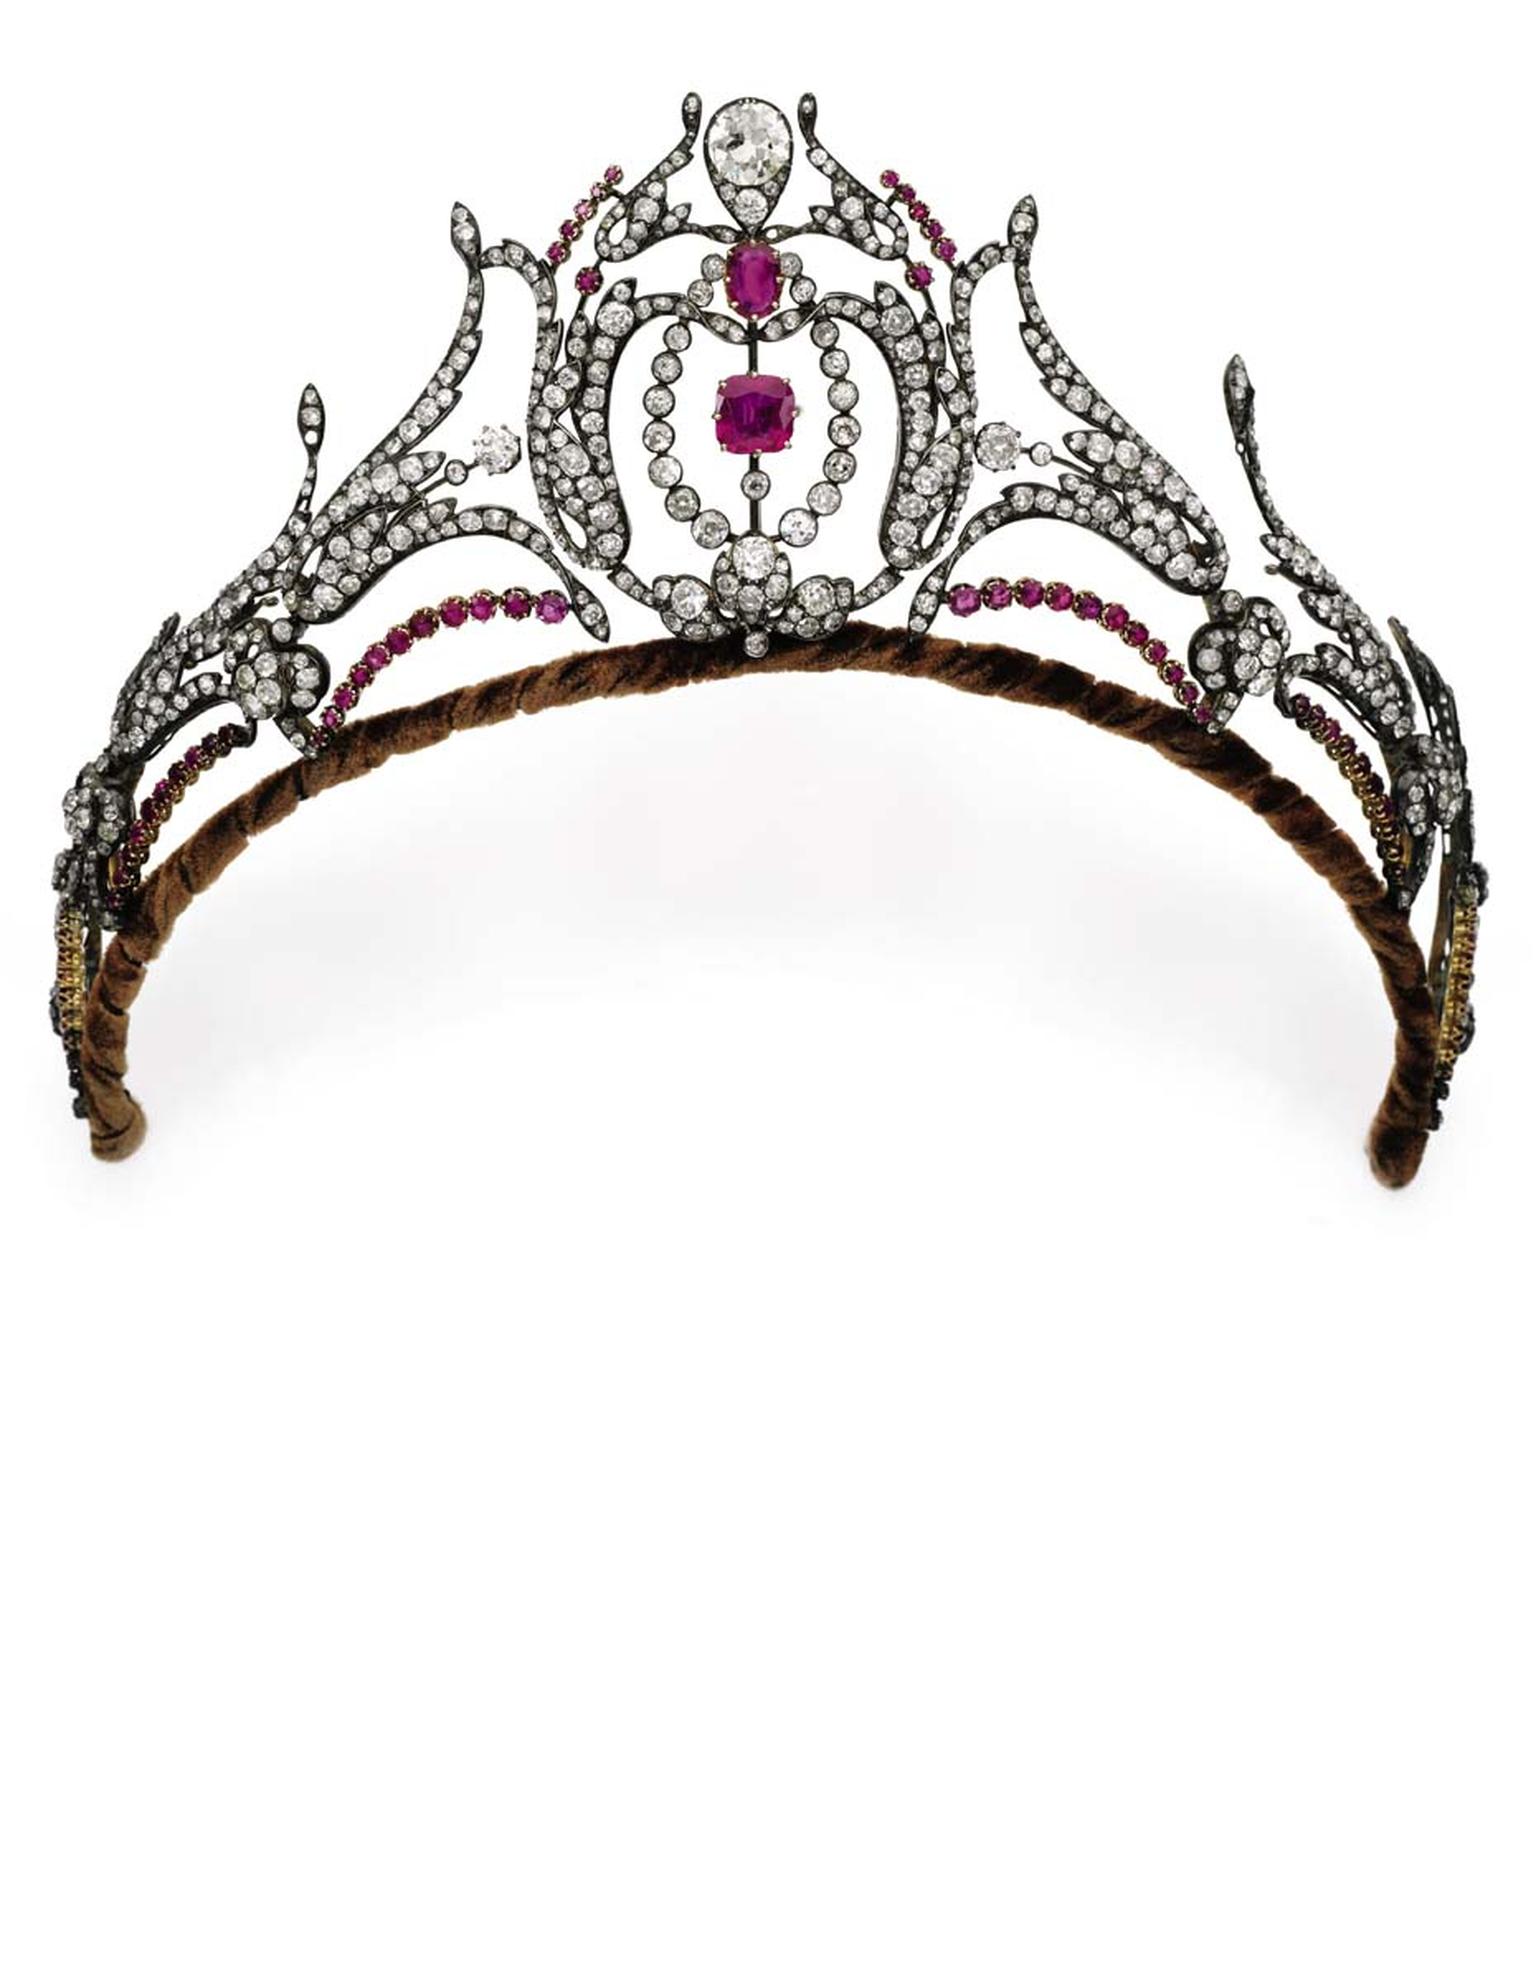 Dating from the second half of the 19th century, this diamond and ruby tiara, which belonged to the late Duchess of Roxburghe, is one of five antique tiaras that will be auctioned by Sotheby’s Geneva in May (estimate: $81-102,000).